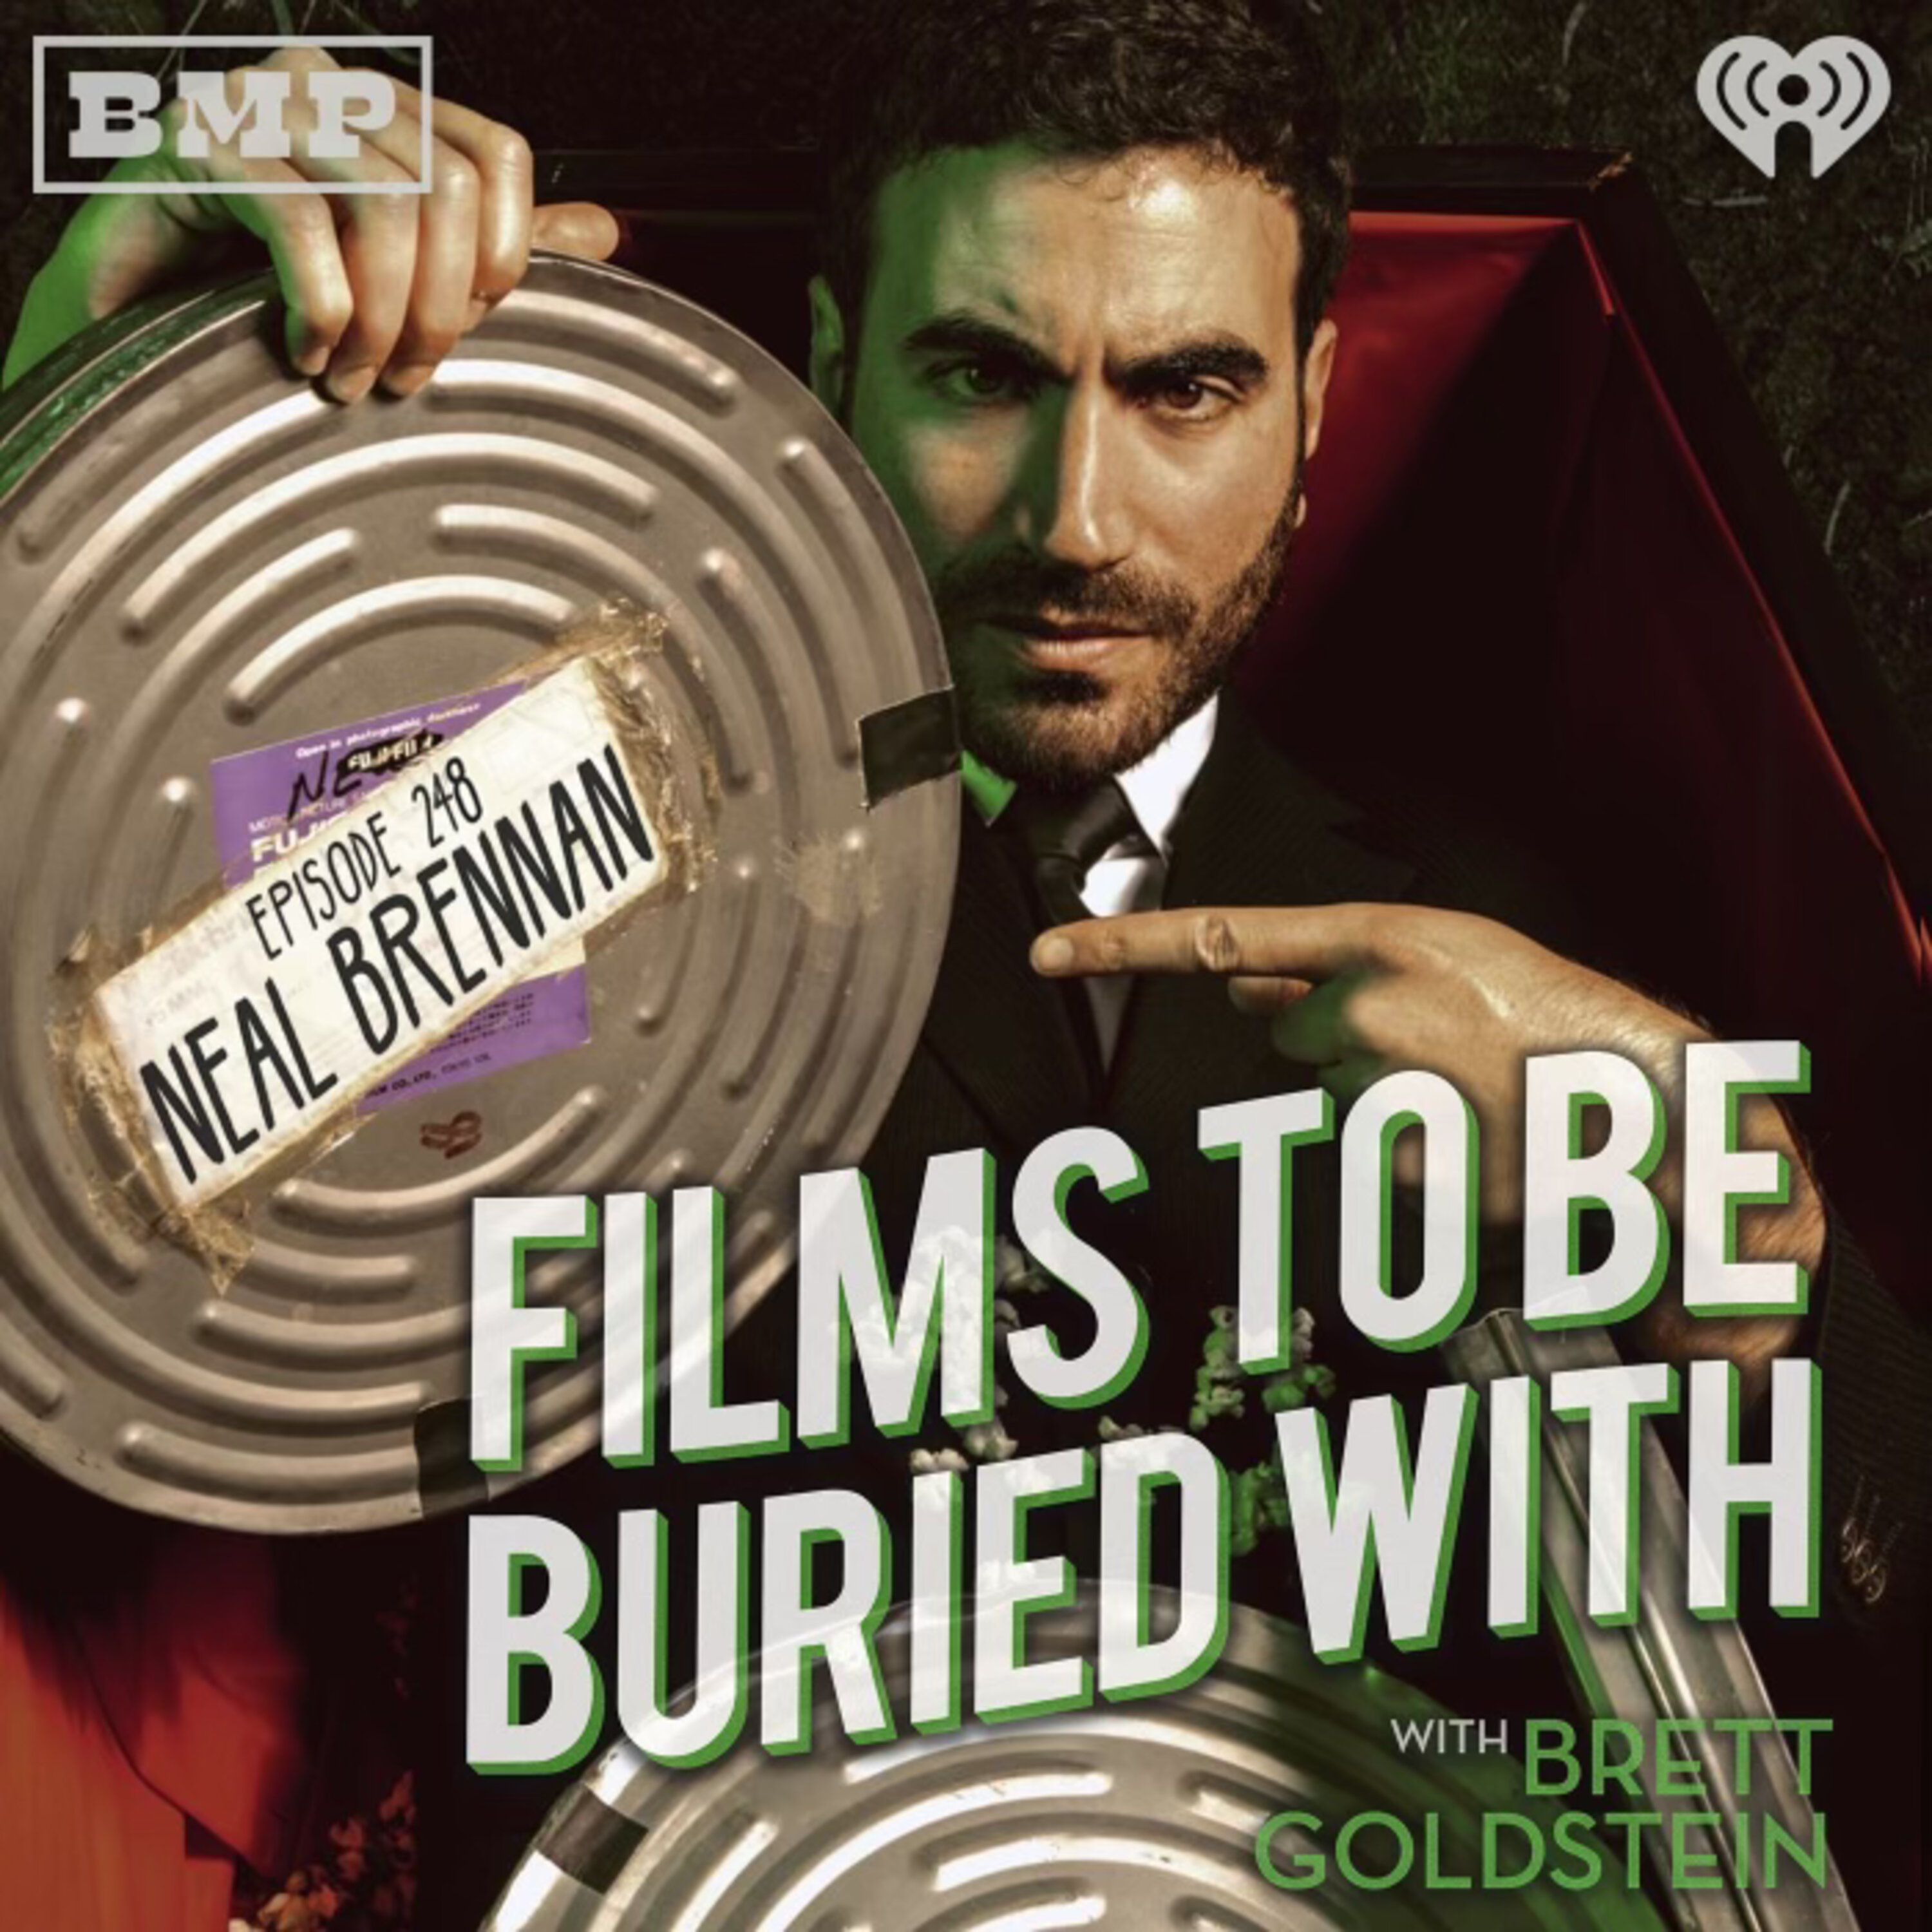 Neal Brennan • Films To Be Buried With with Brett Goldstein #249